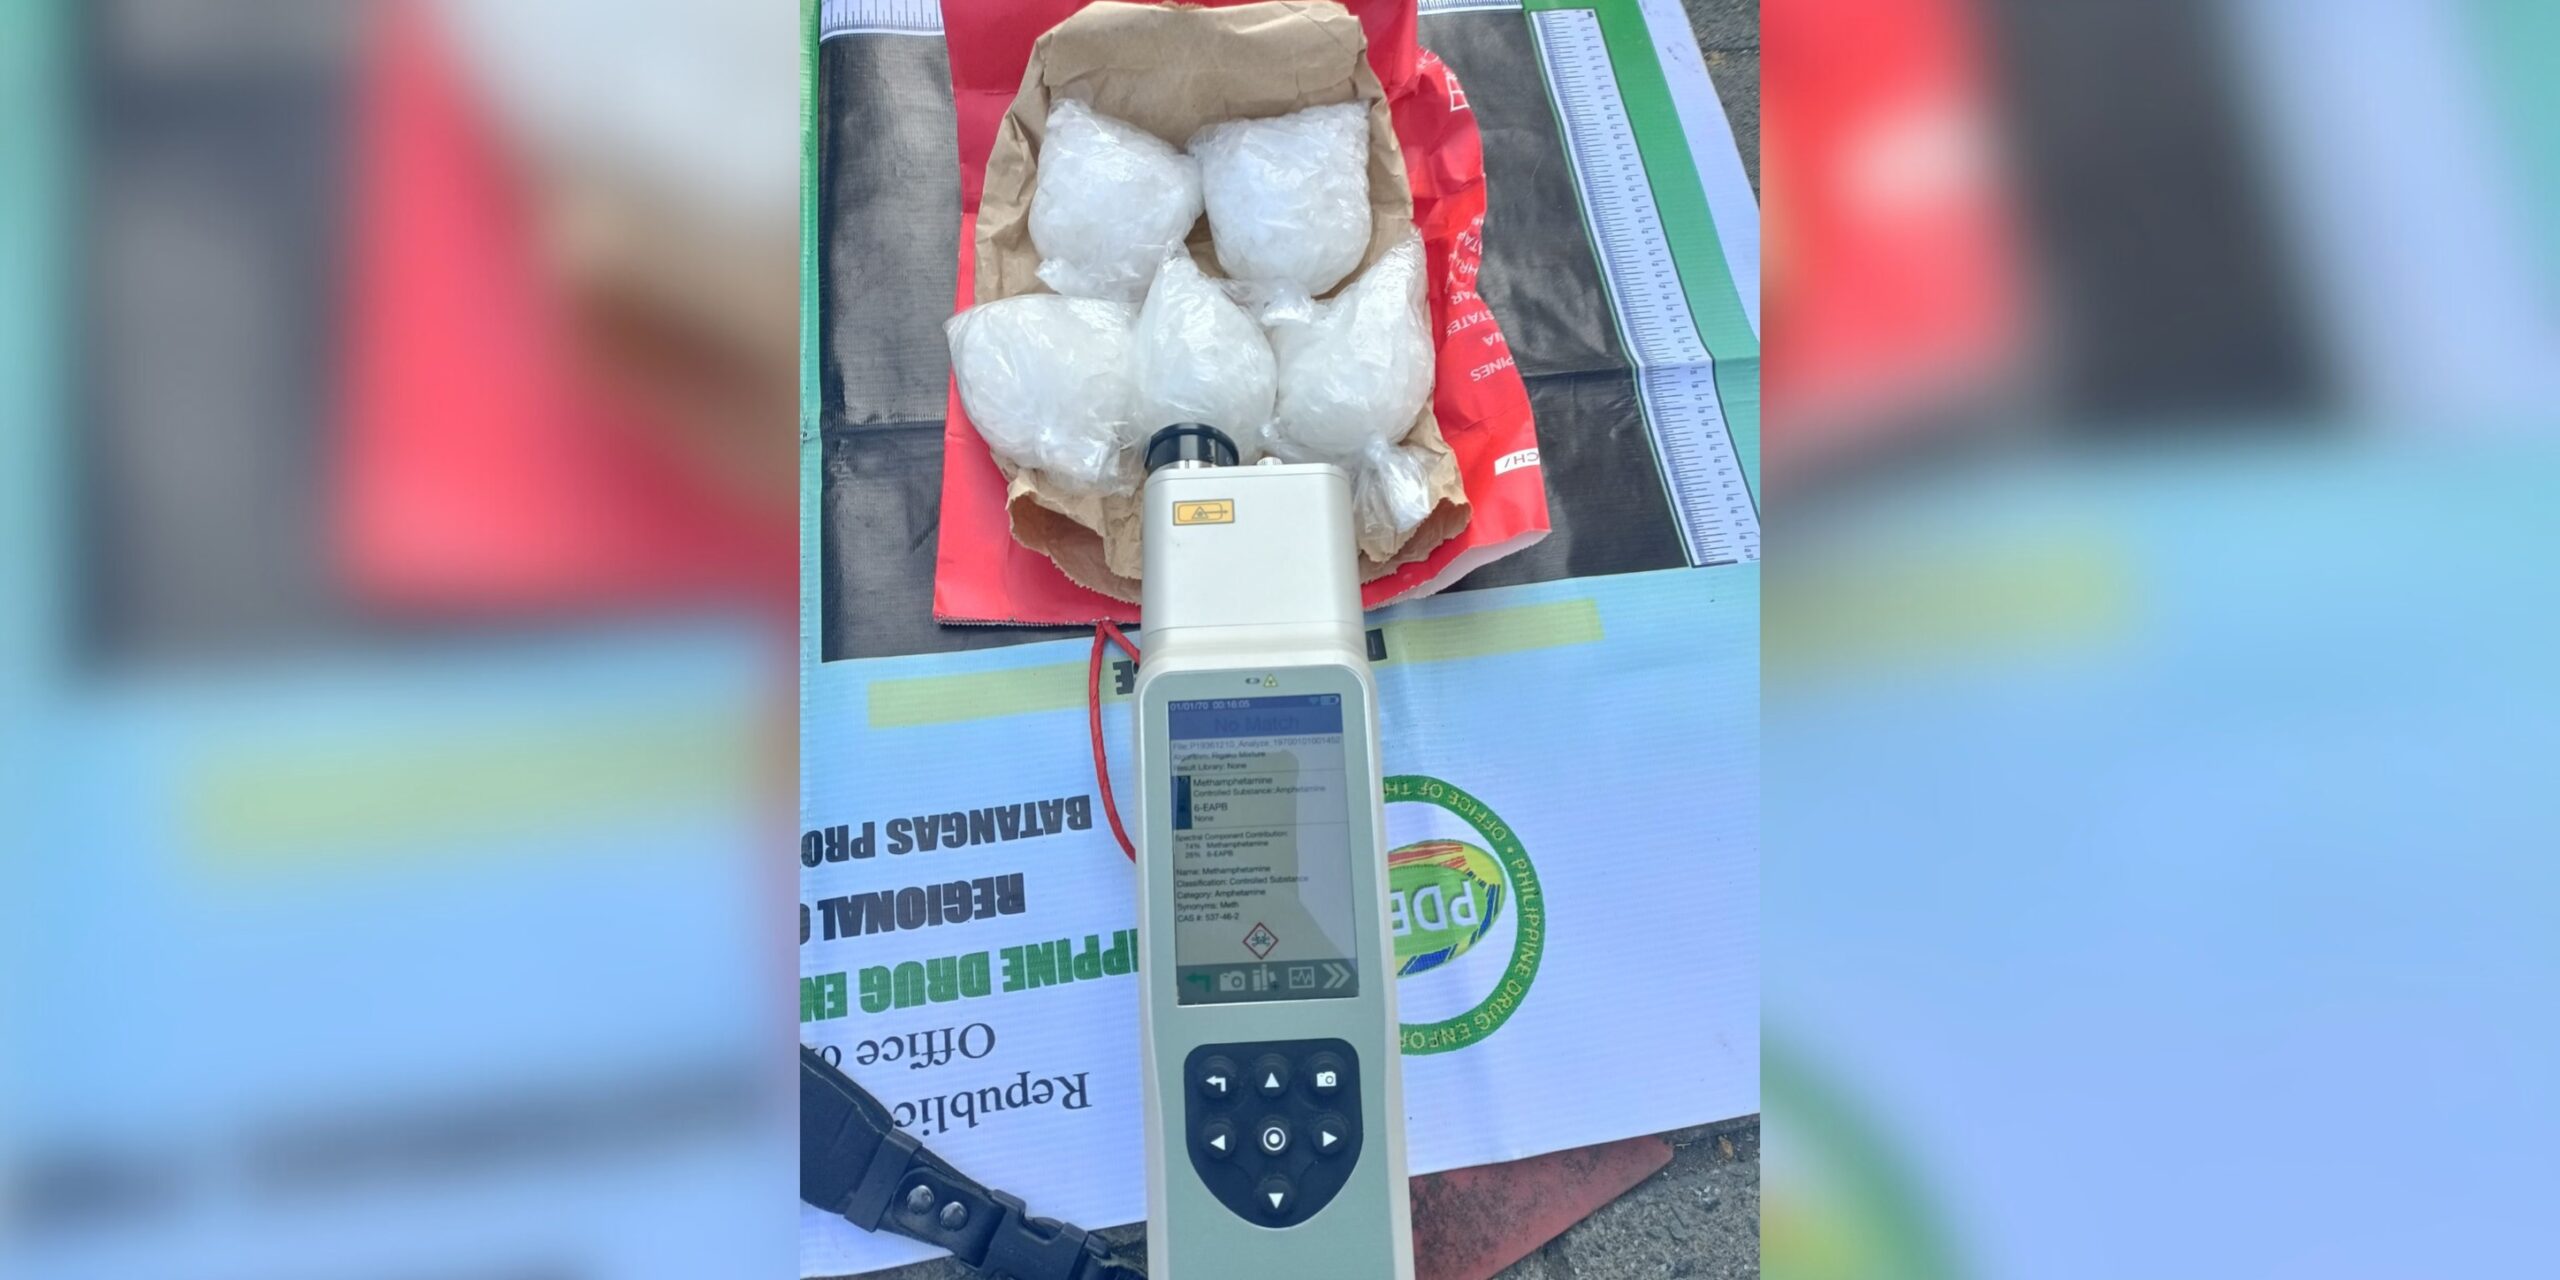 Local authorities seized 500 grams of suspected methamphetamine hydrochloride, locally known as “shabu,” in Batangas port with an estimated market value of P3.4 million. 